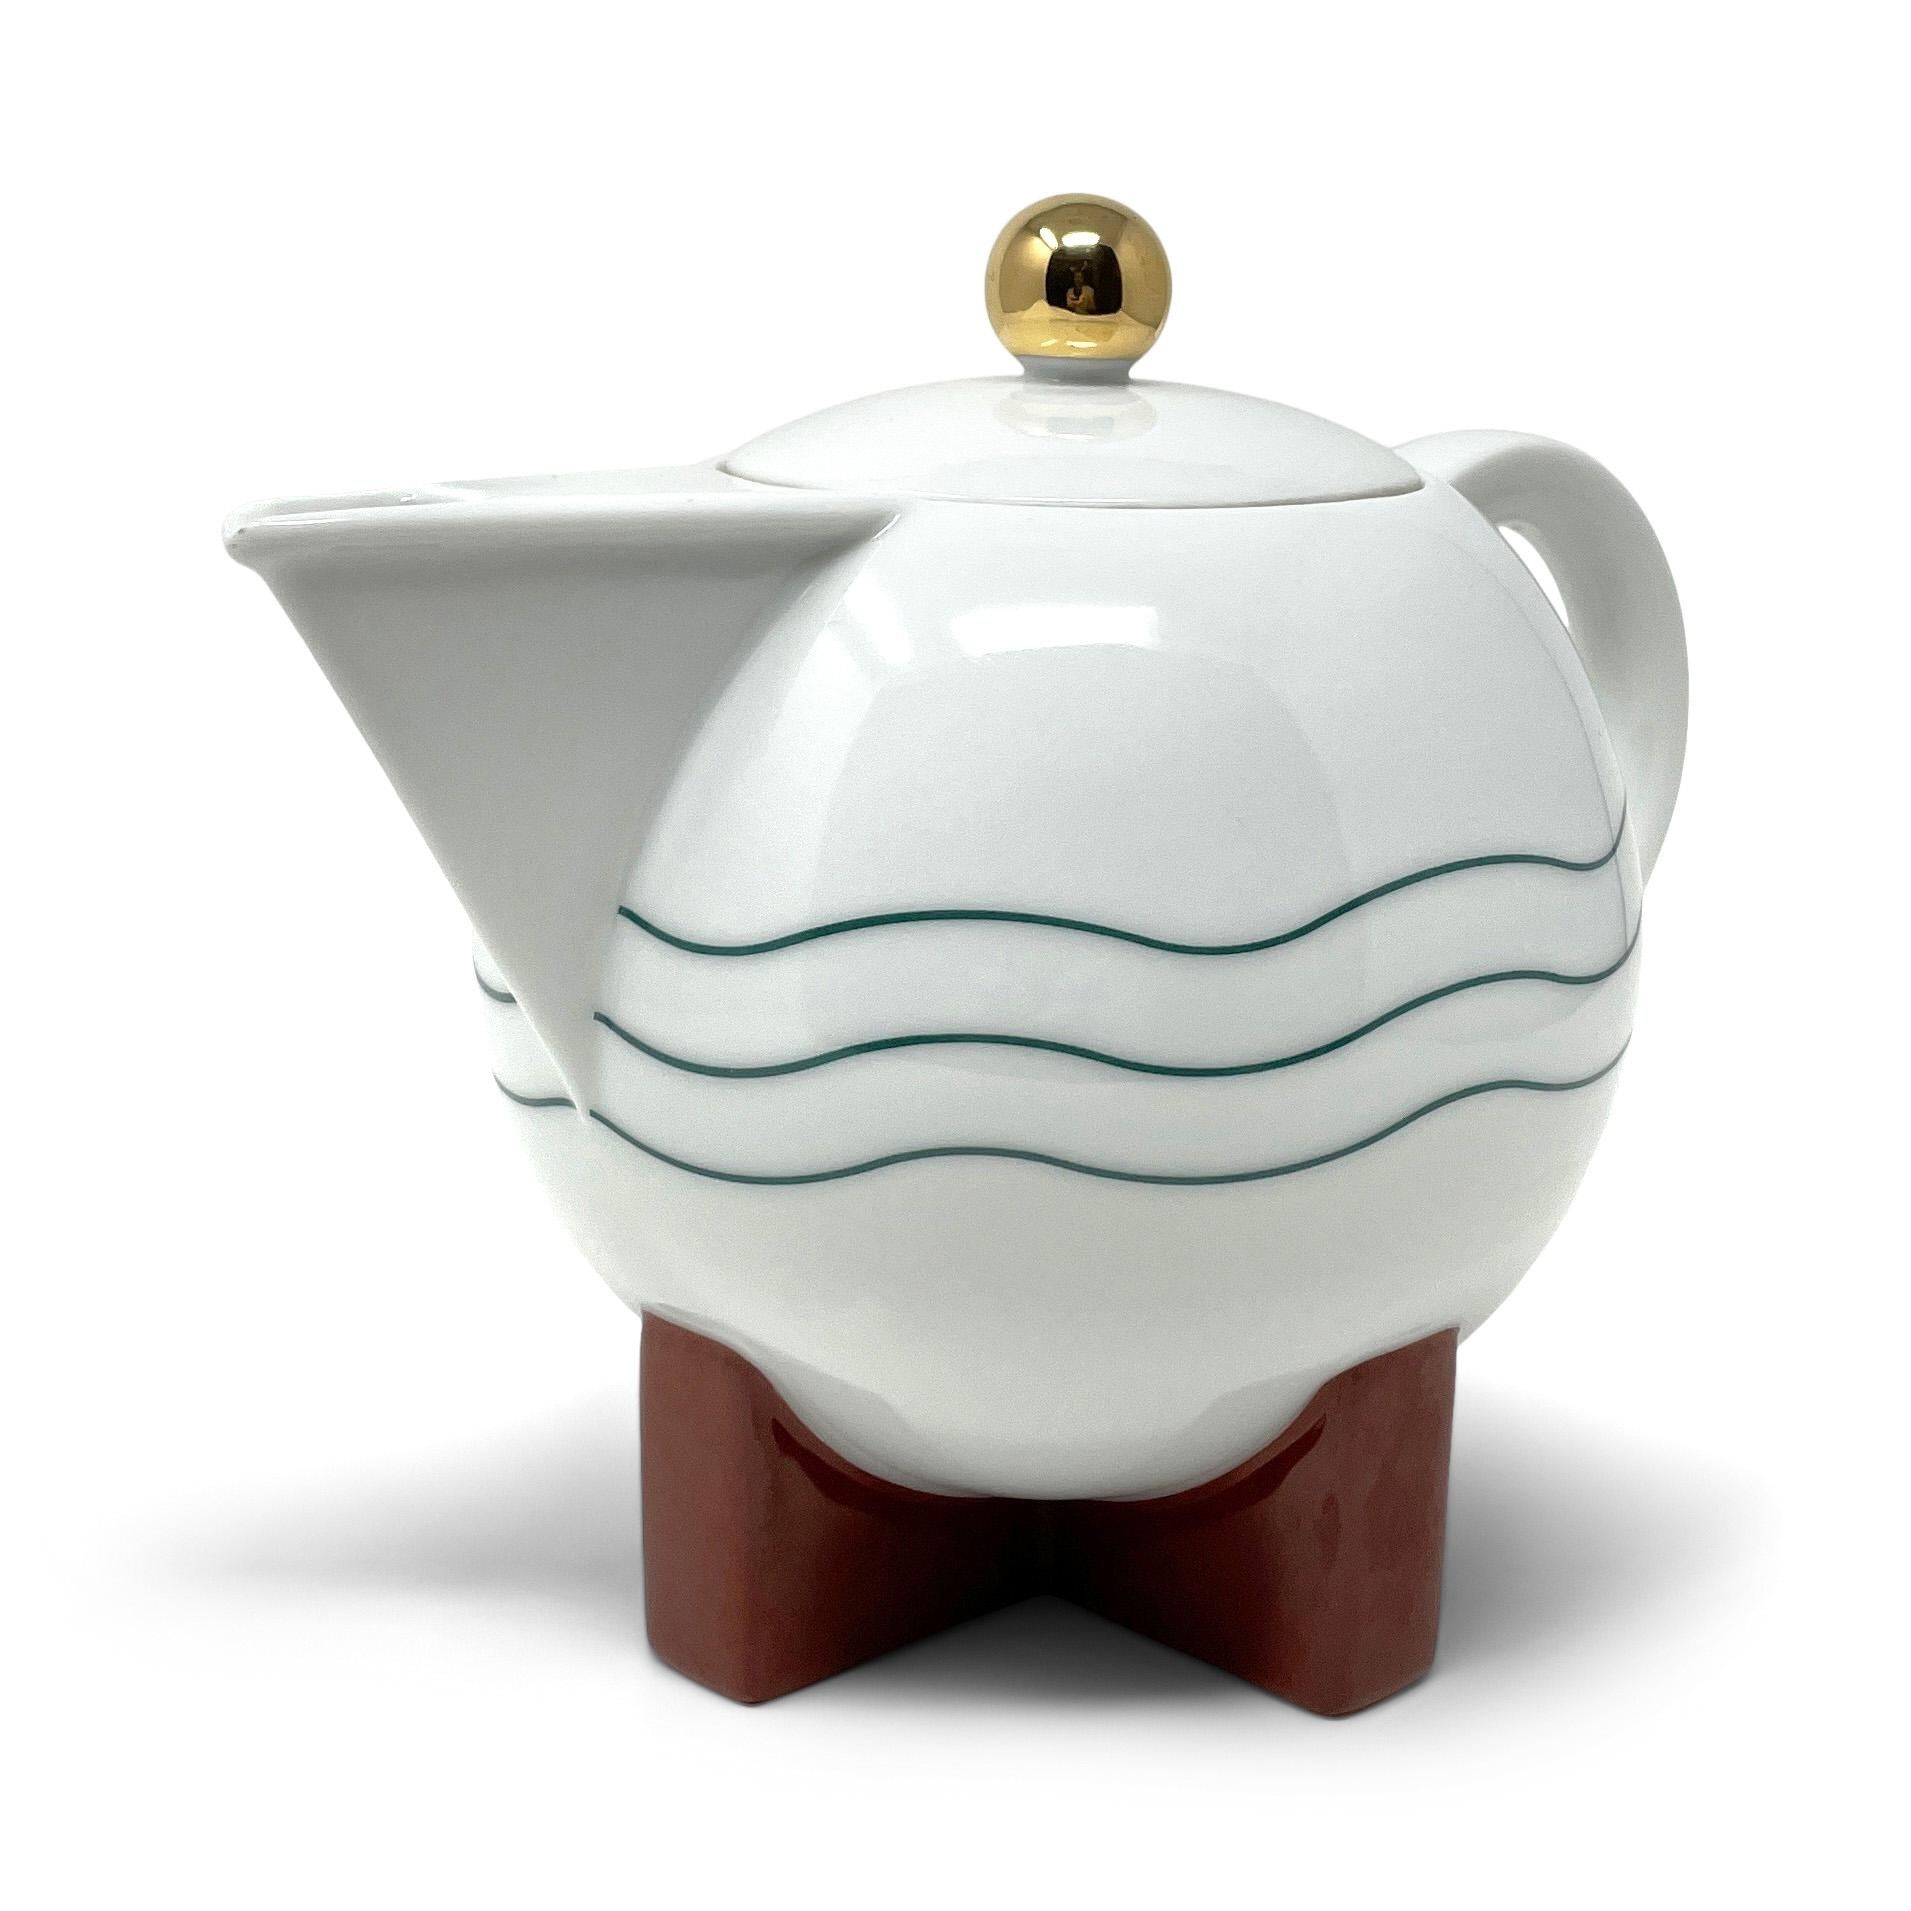 Perhaps Michael Graves' (1934-2015) most well-known design for Swid Powell, The Little Dripper (1986) is a 10 cup coffee pot born from Graves' preference for drip coffee and a lack of available drip coffee makers that met his aesthetic standards.